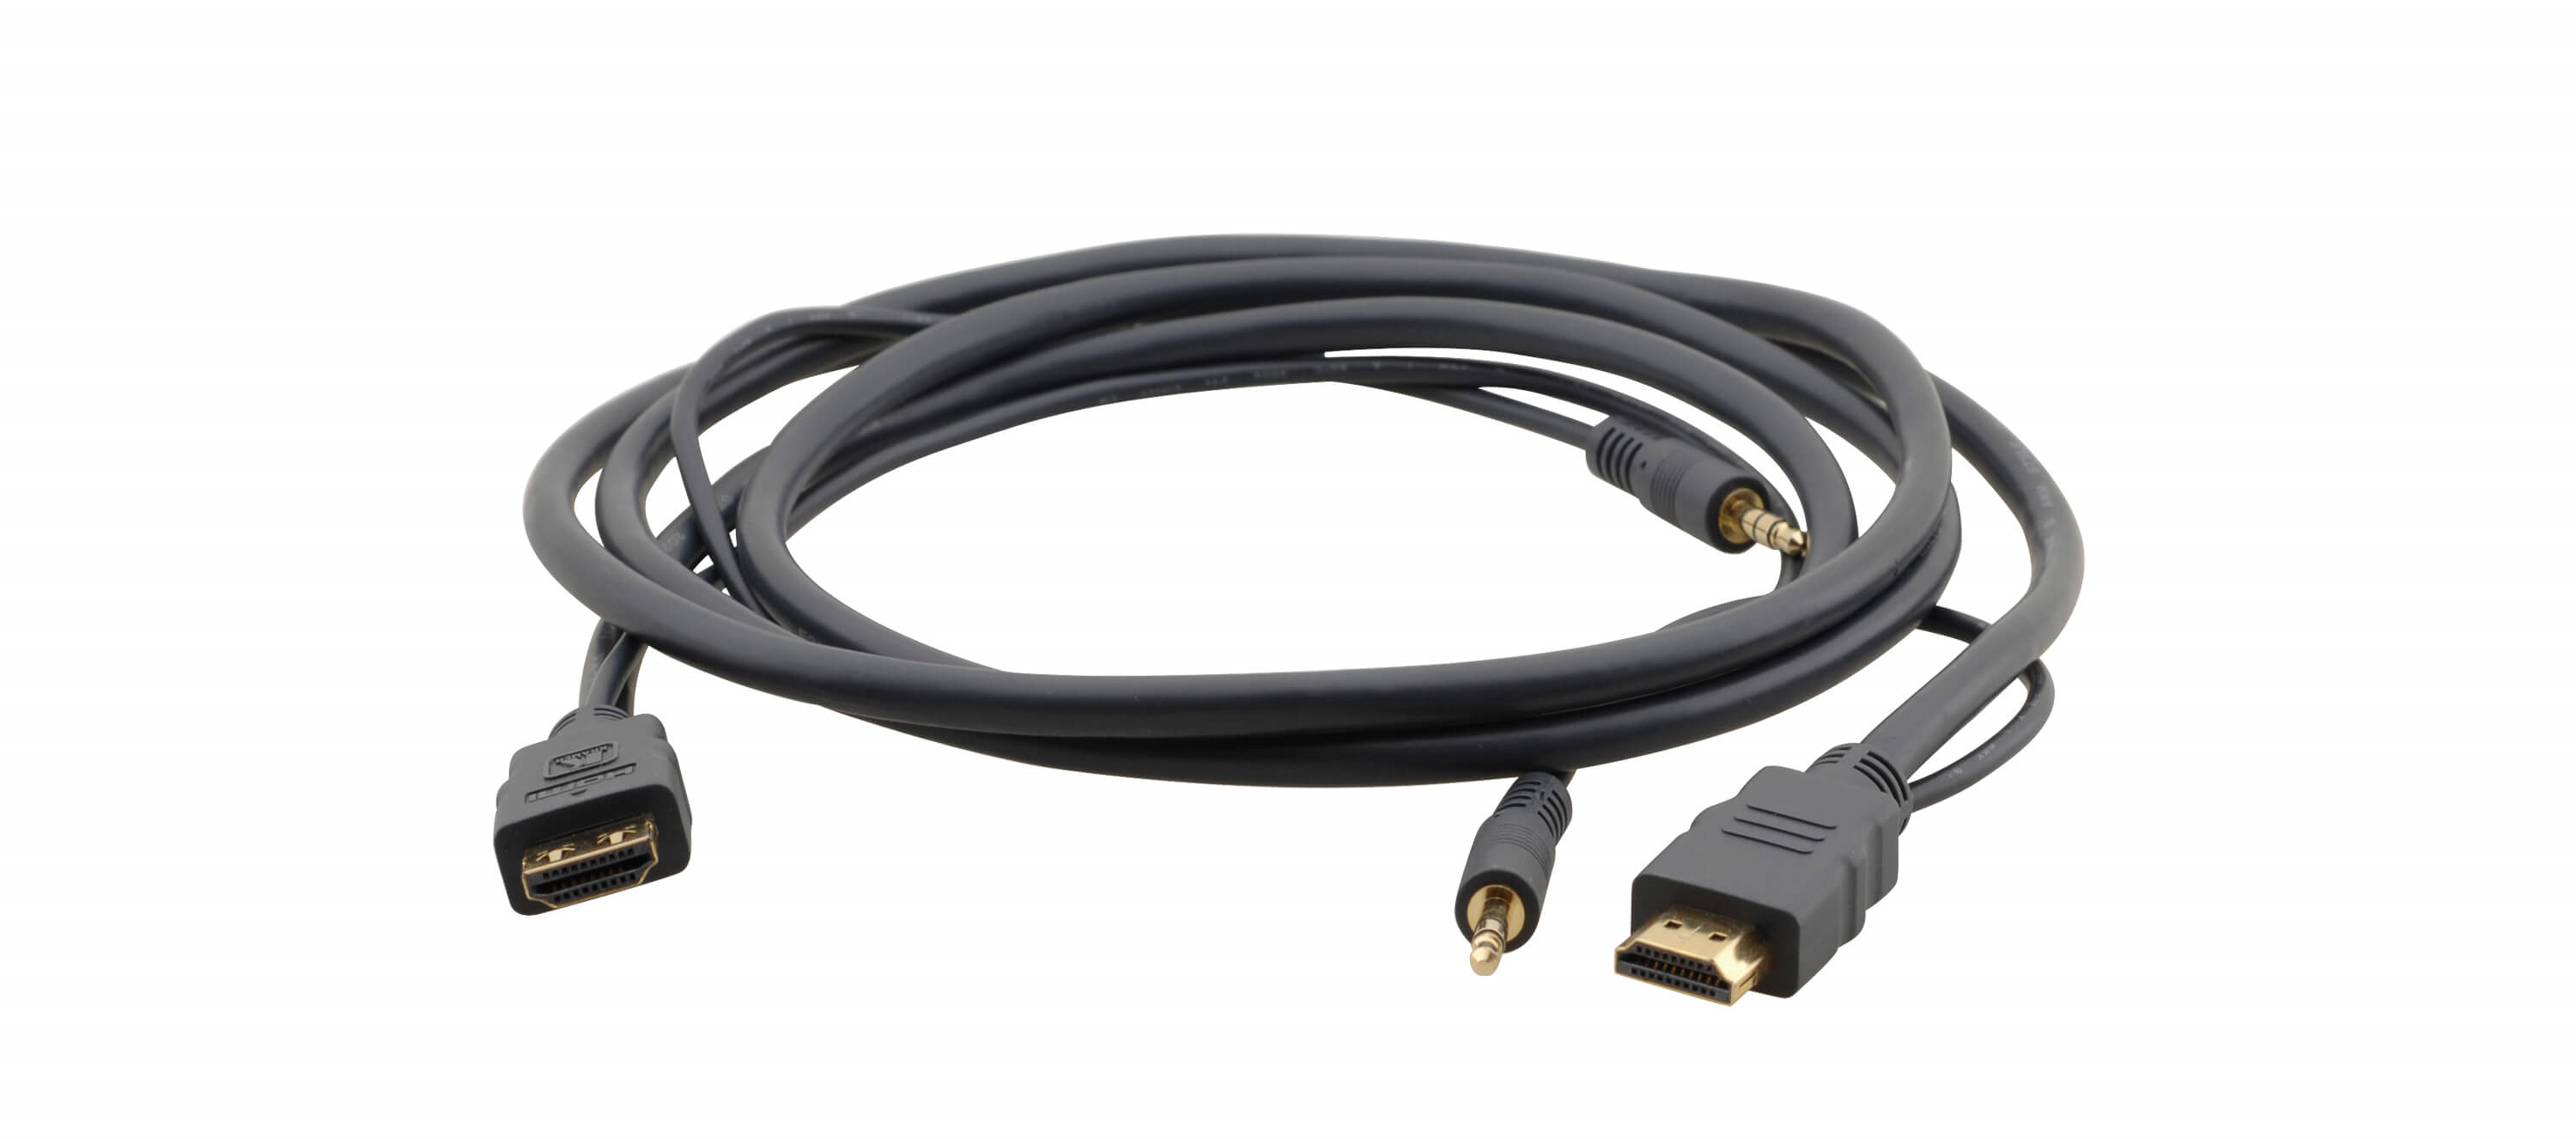 C-MHMA/MHMA-15 Flexible High–Speed HDMI Cable with Ethernet & 3.5mm Stereo Audio - 15'